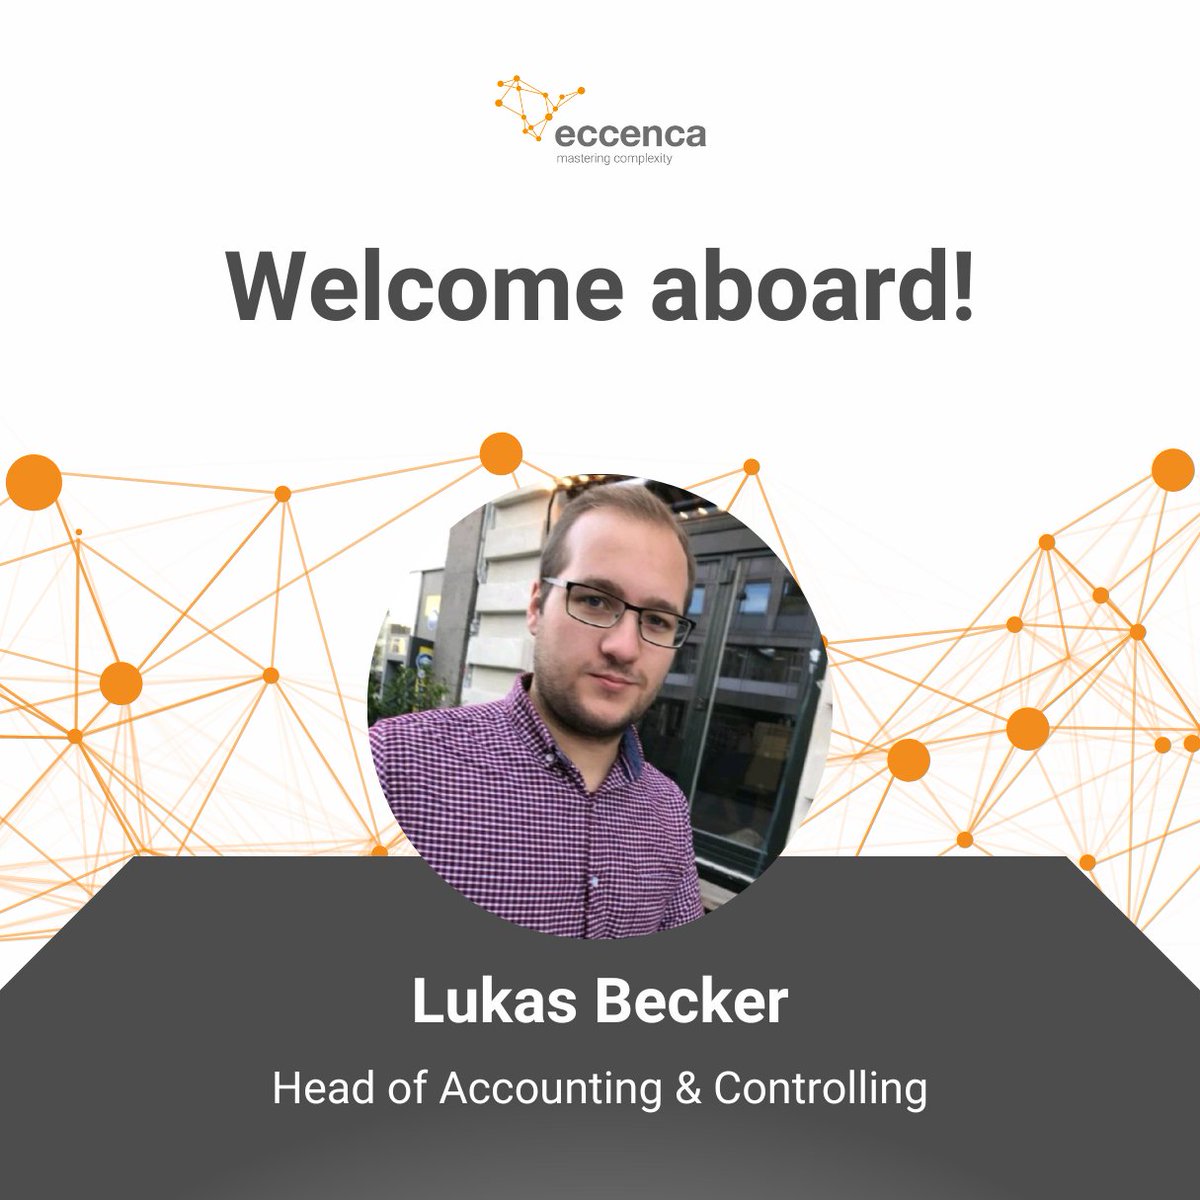 Lukas Becker has joined eccenca! He's no stranger to us as he has already worked for our partner innoNord. Now he has switched to actively support our CEO, Chris Brockmann. His motto is: 'Create solutions. Not managing problems.' That fits us! Welcome to the team Lukas.